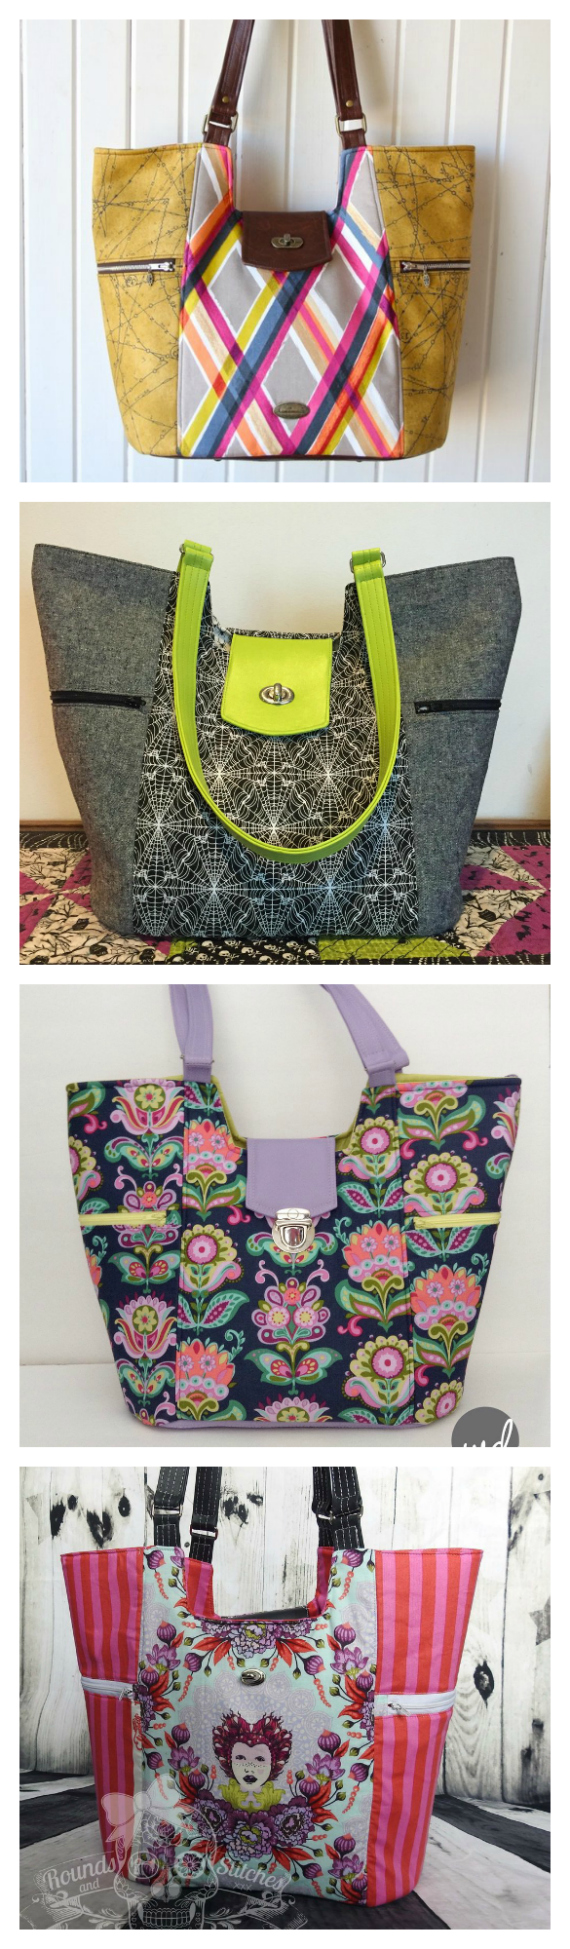 If you want to make a very large bag then The Mimosa Market tote is the bag for you. It is 13.5" wide by 13" high by 8" deep and has the following features: It has 2 large exterior side zipper pockets A large oval base An optional tab closure with instructions for a twist lock but can easily be substituted with a different closure The vinyl accents could easily be replaced with fabric - the instructions will apply to both methods The interior of the bag comes with 2 large slip pockets and an optional removable false bottom to give the bag extra support at the base.